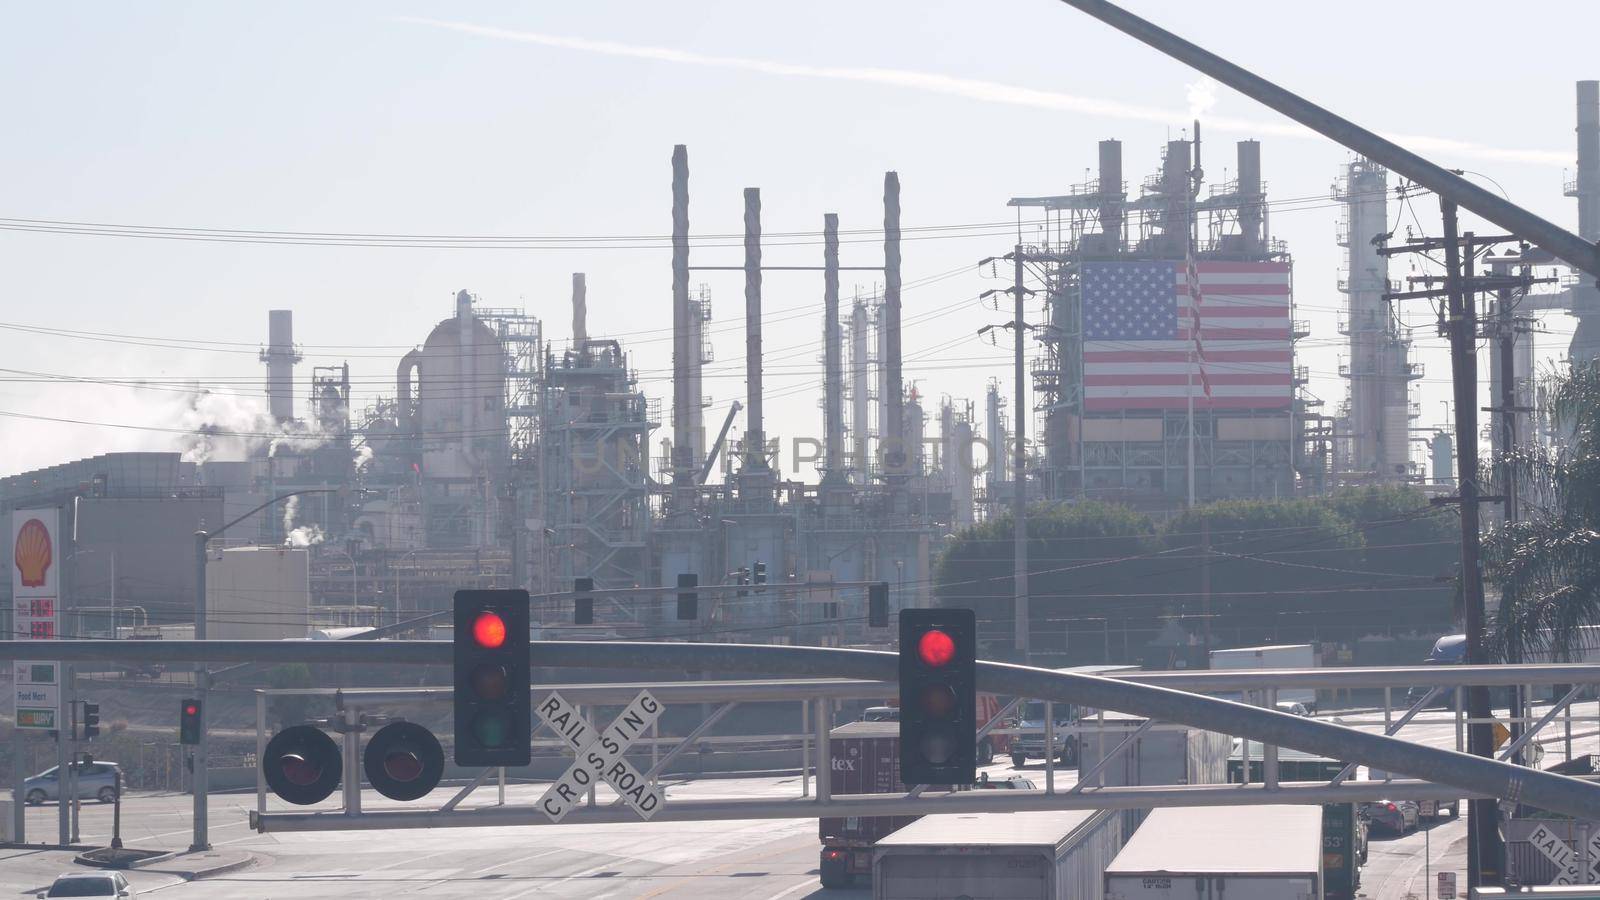 Carson, California, USA - 02 Dec 2020: Marathon oil refinery, Los Angeles. Petroleum, chemicals and gasoline factory. American flag and smokestacks of industrial petrochemicals plant, Wilmington ave.